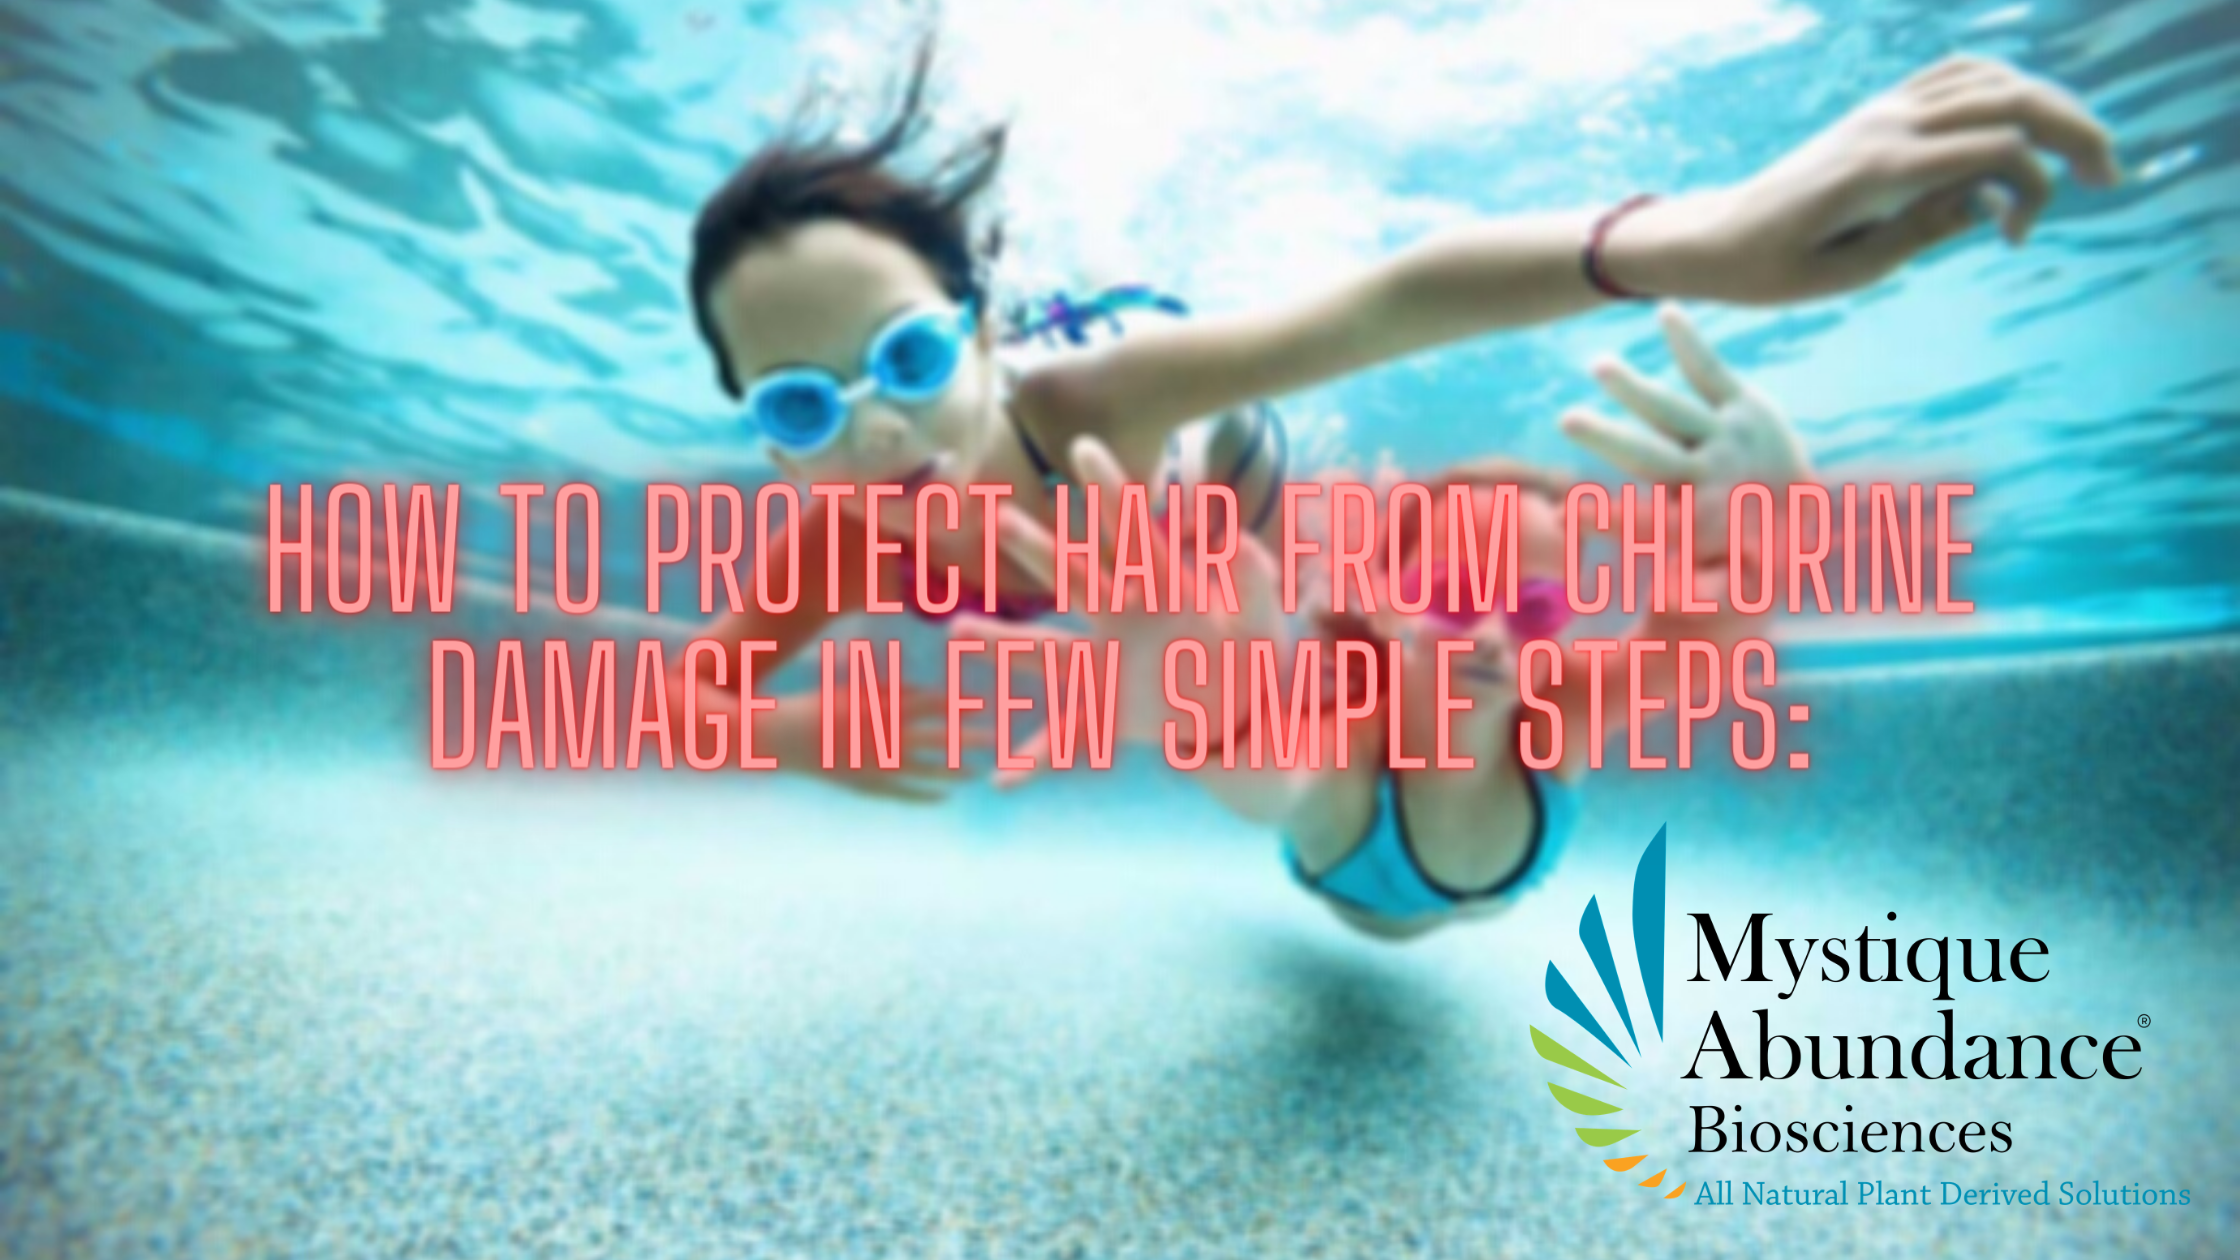 How to Protect Hair From Chlorine Damage in Few Simple Steps: